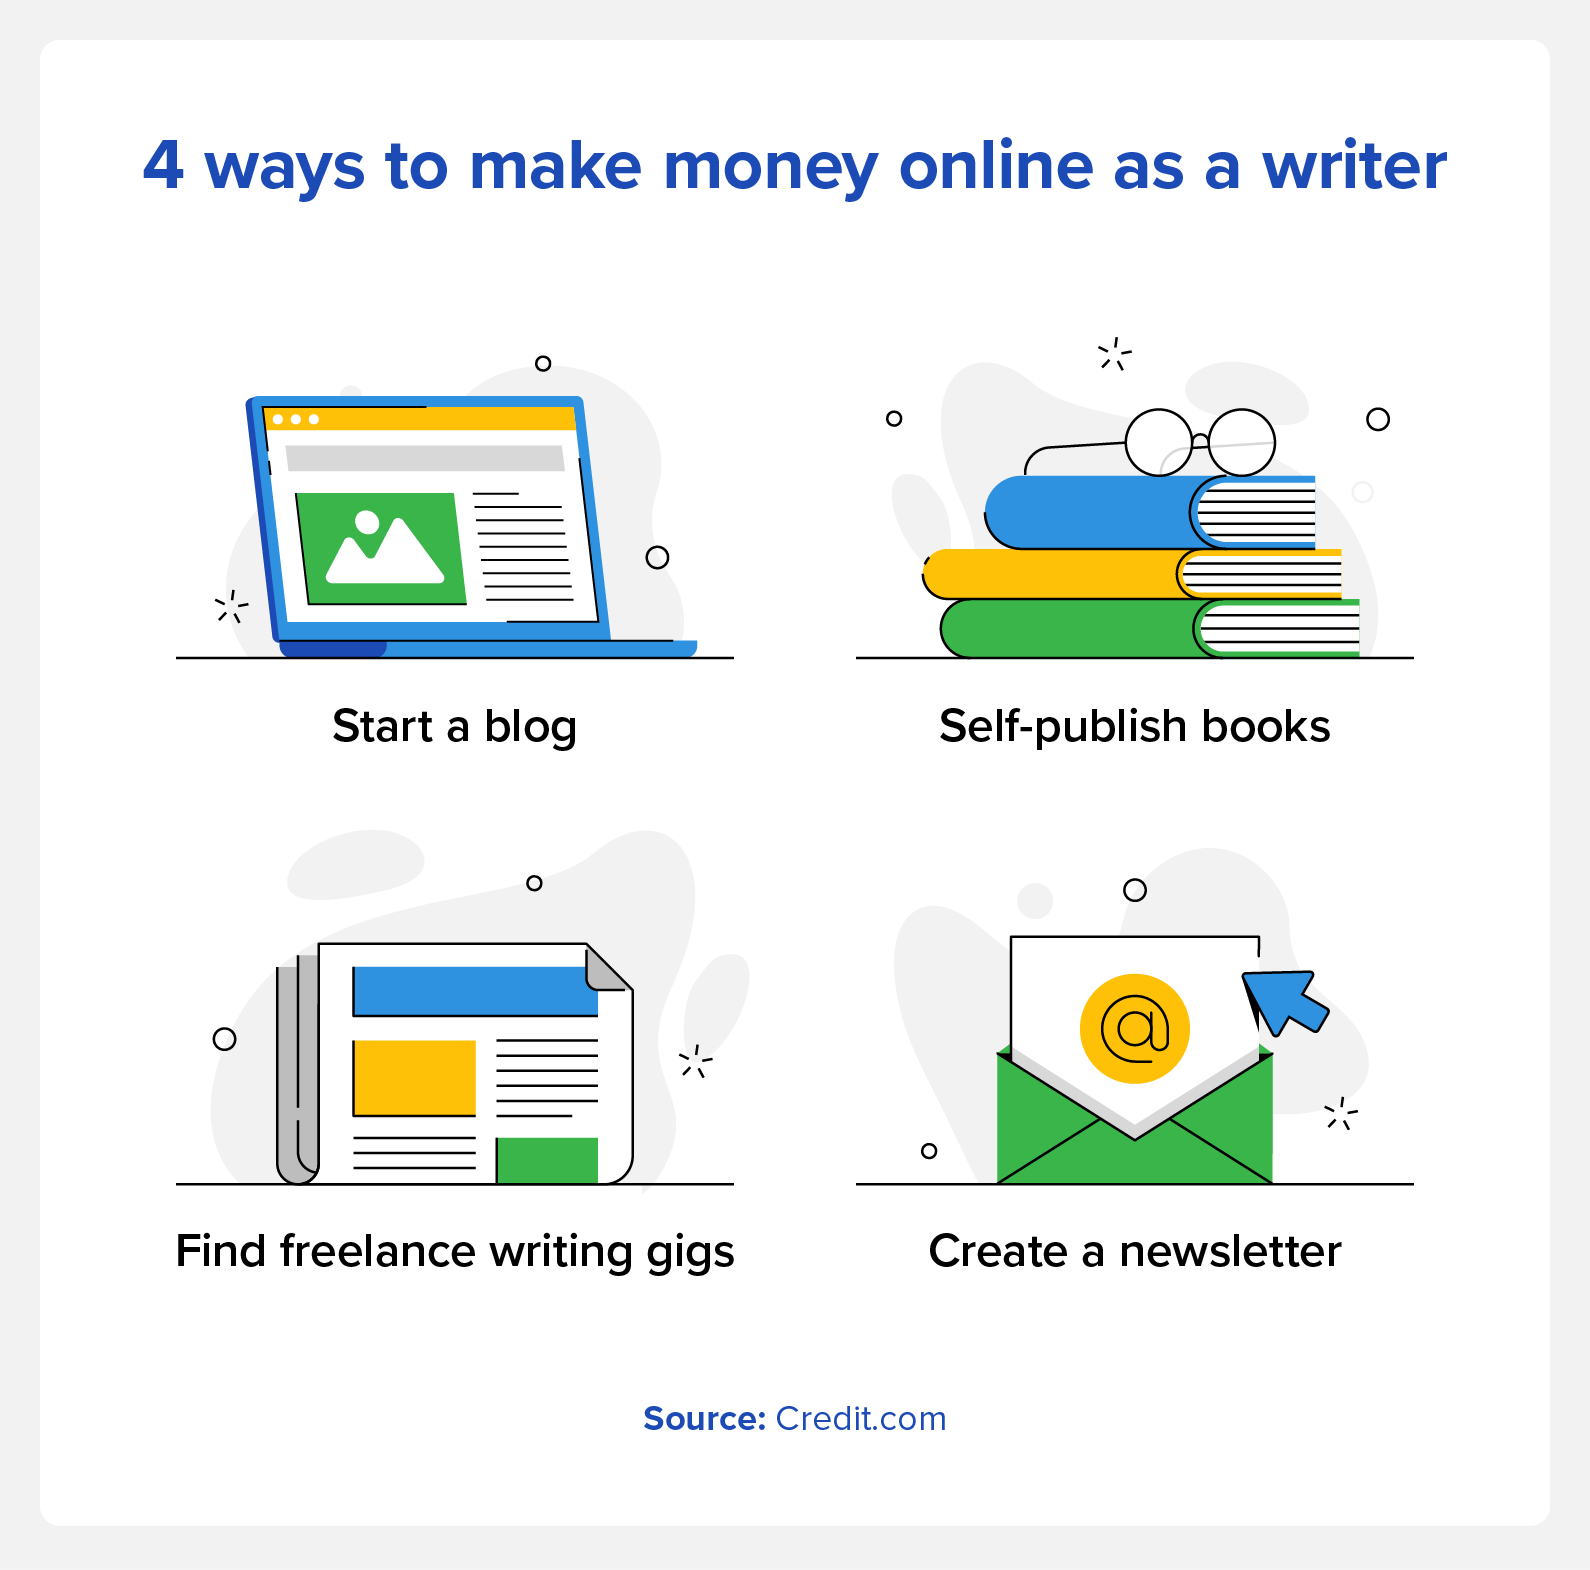 Great ways to make money online as a writer include blogging, self-publishing books, freelance writing, and starting a newsletter.